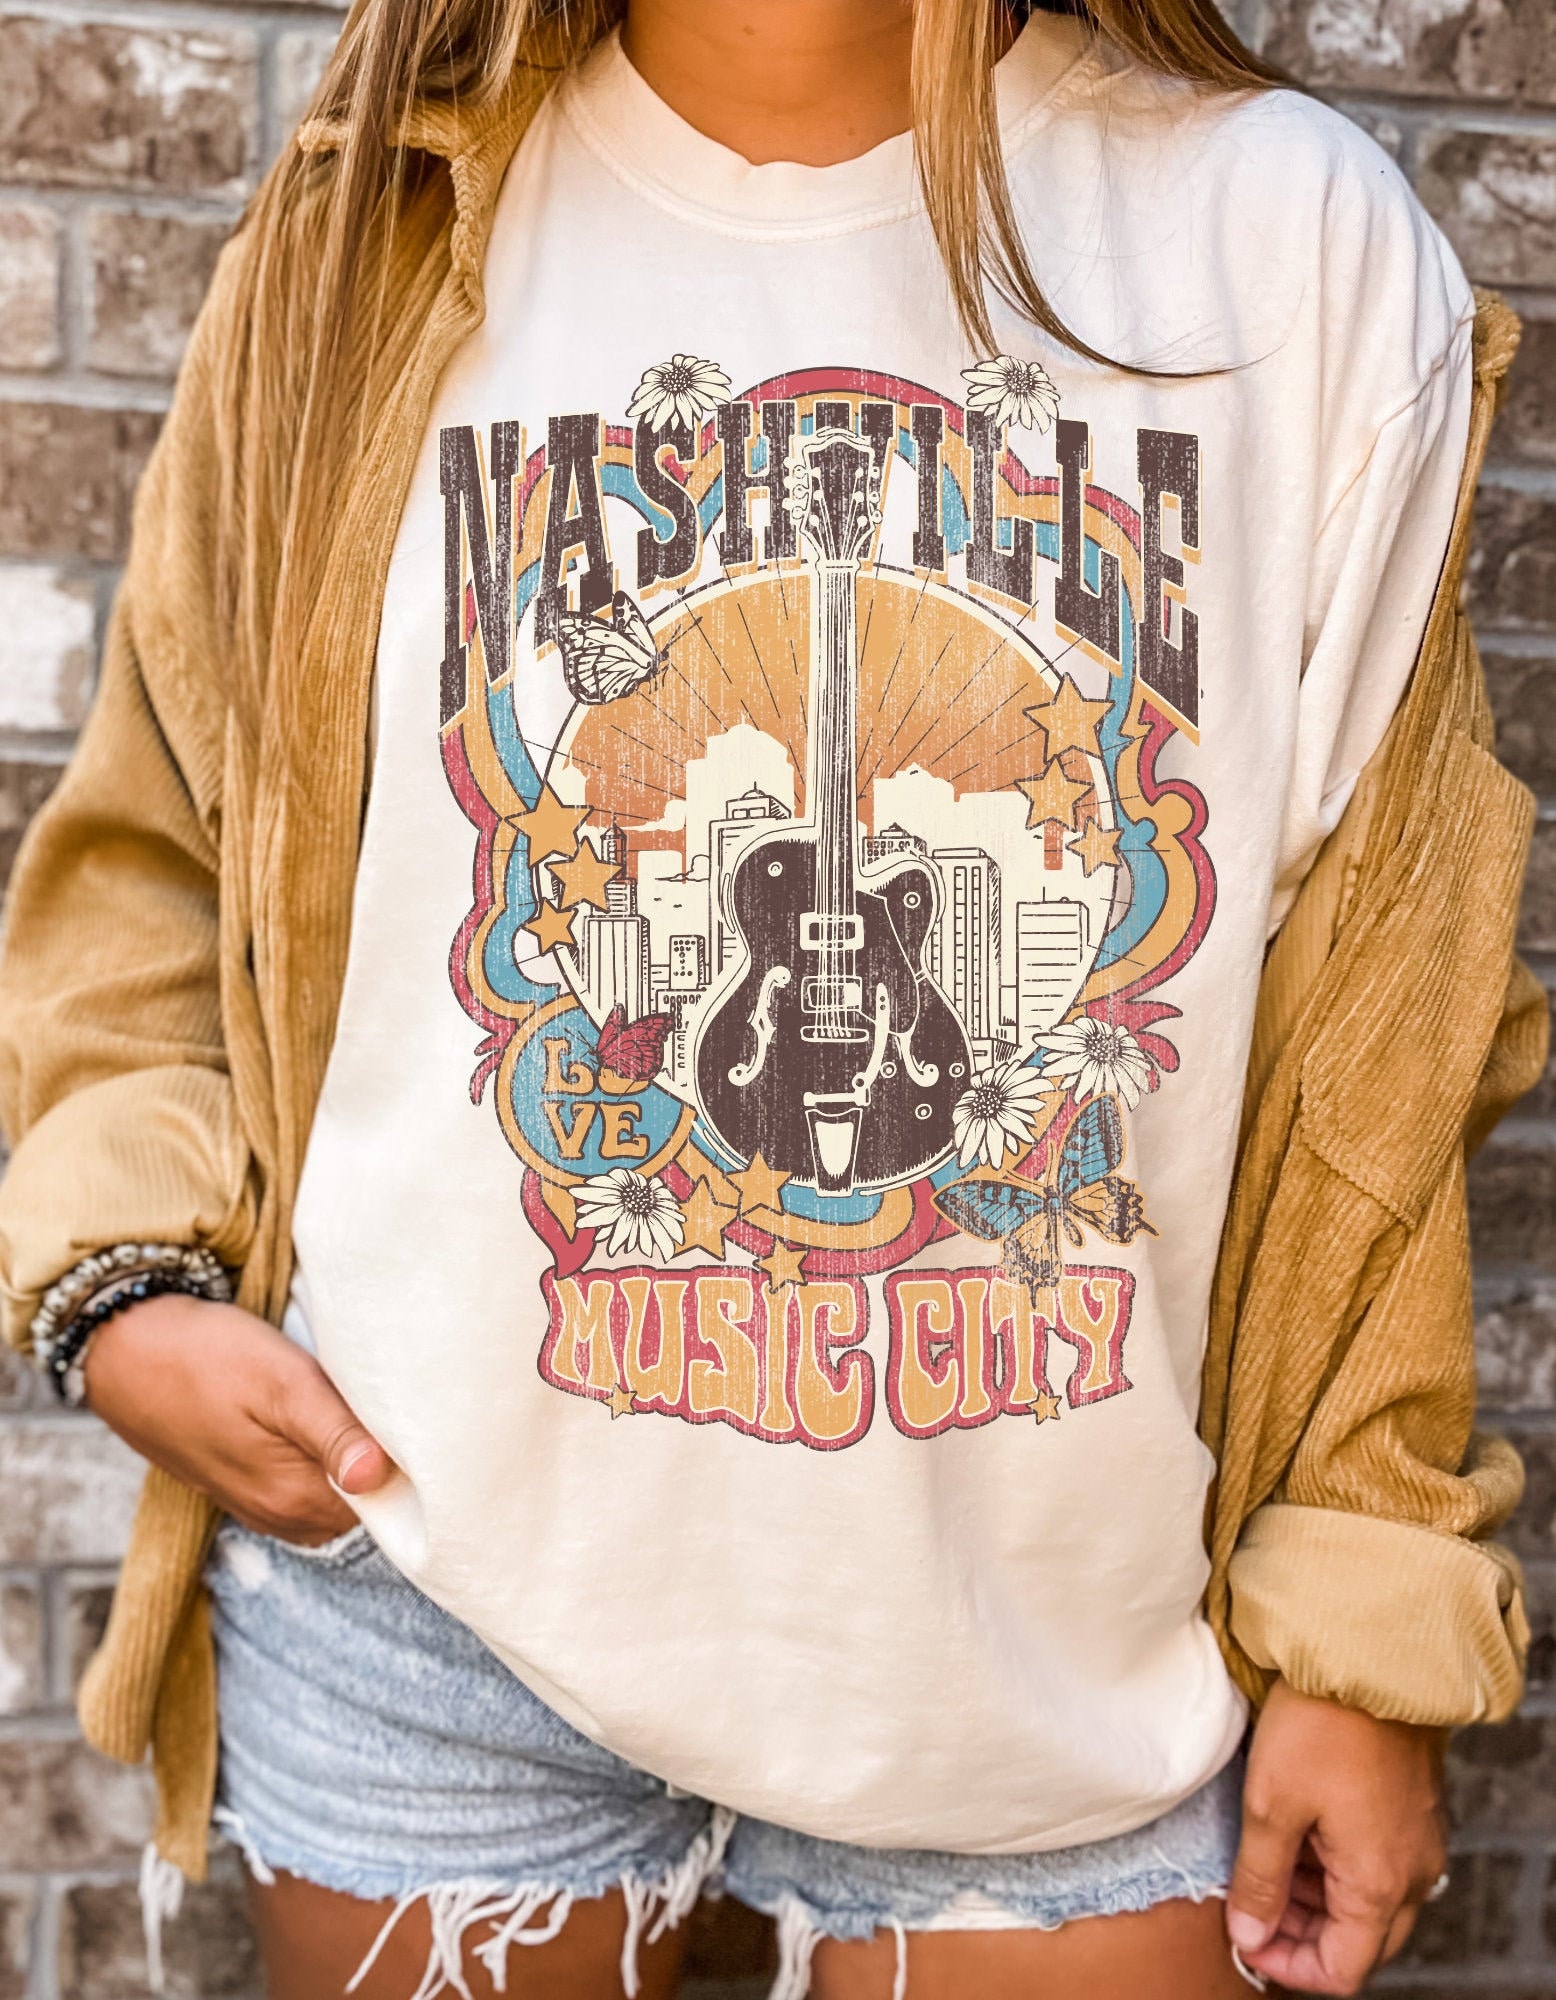 Discover Nashville Tee, Nashville T-Shirt, Music City, Tennessee Tee, Vintage Inspired Cotton T-Shirt